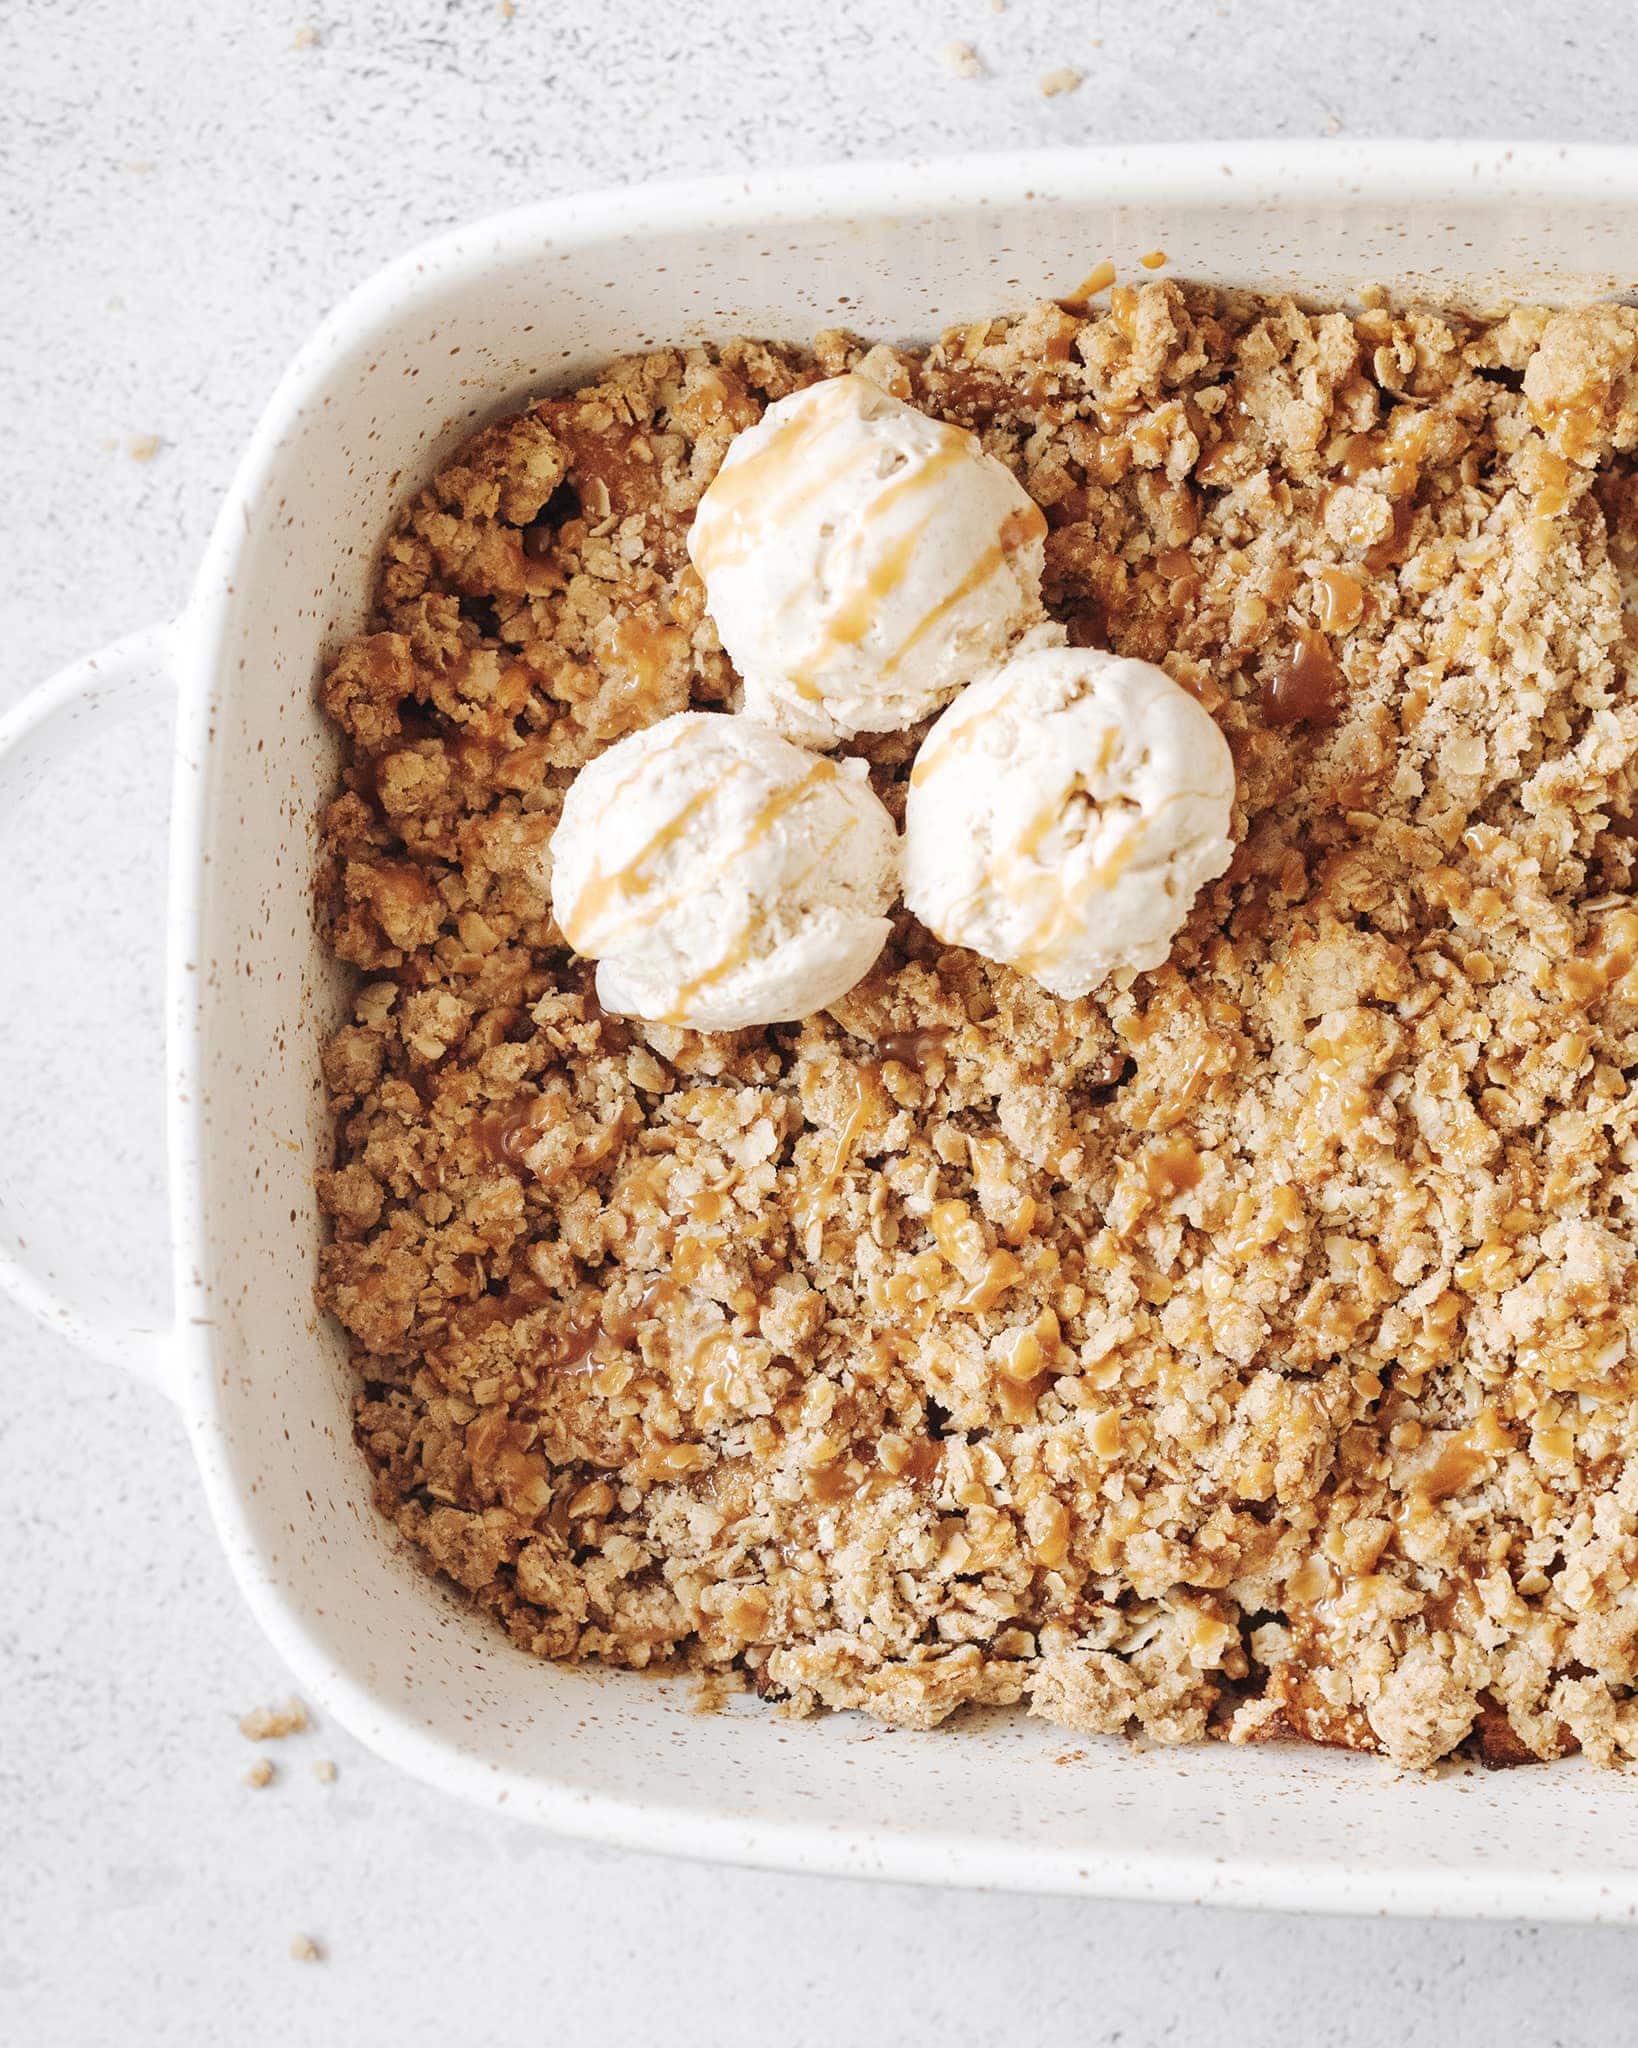 Baking dish of apple crisp topped with scoops of ice cream